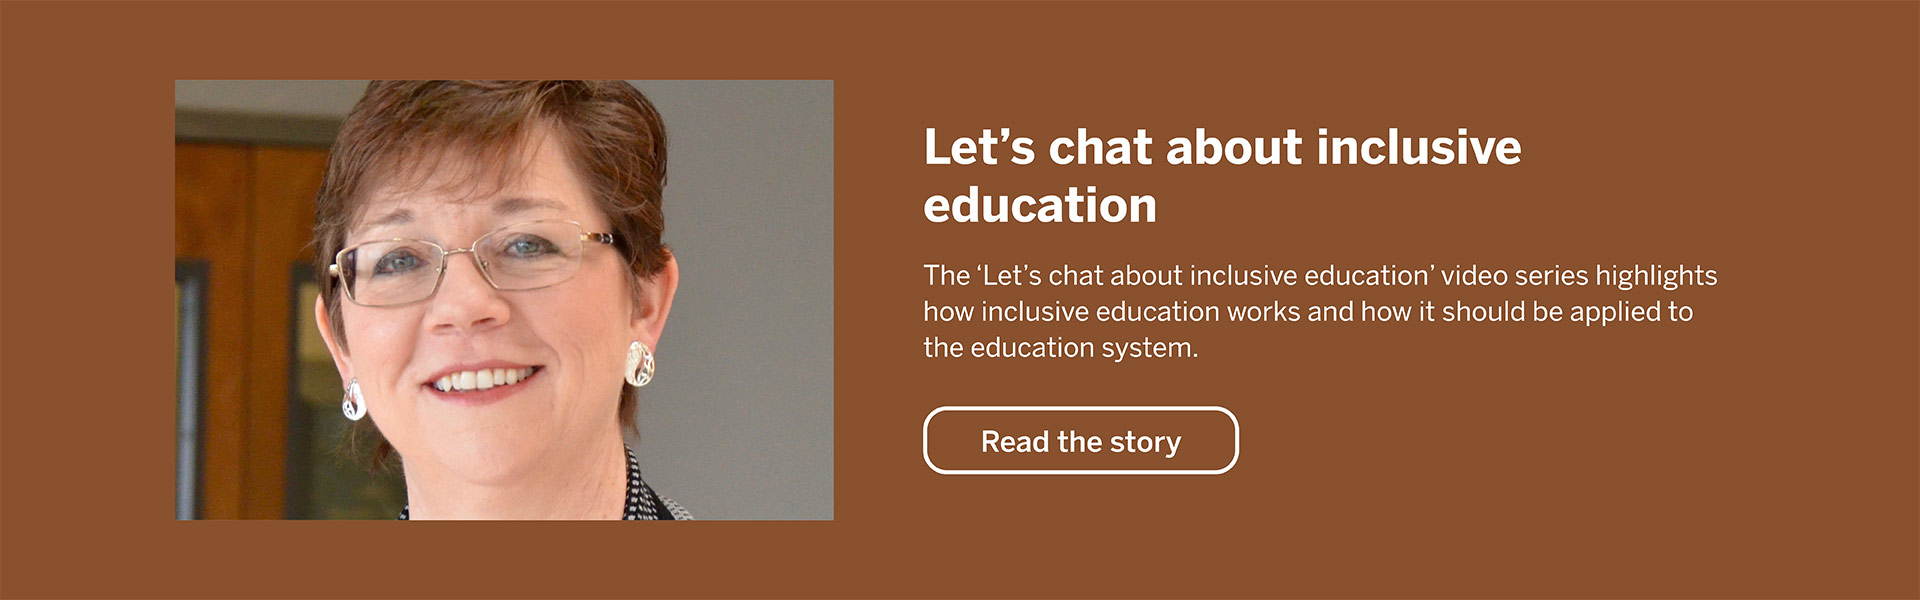 Lets chat about inclusive education. The lets chat about inclusive education video series highlights how inclusive education works and how it should be applied to the education system. Read the story.